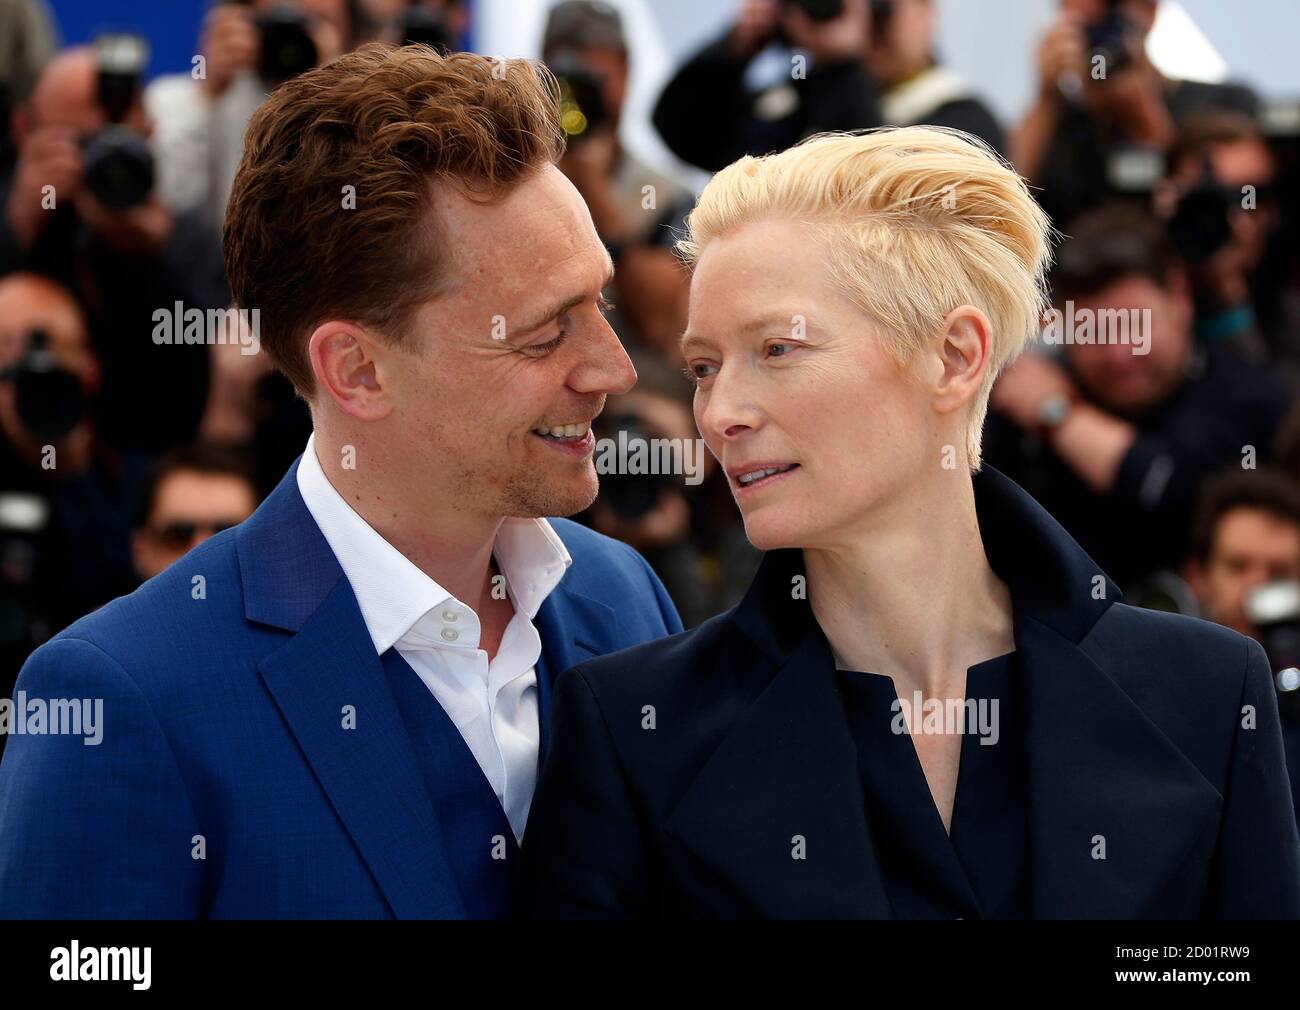 Cast members Tom Hiddleston (L) and Tilda Swinton (R) pose during a  photocall for the film "Only Lovers Left Alive" at the 66th Cannes Film  Festival in Cannes May 25, 2013. REUTERS/Eric